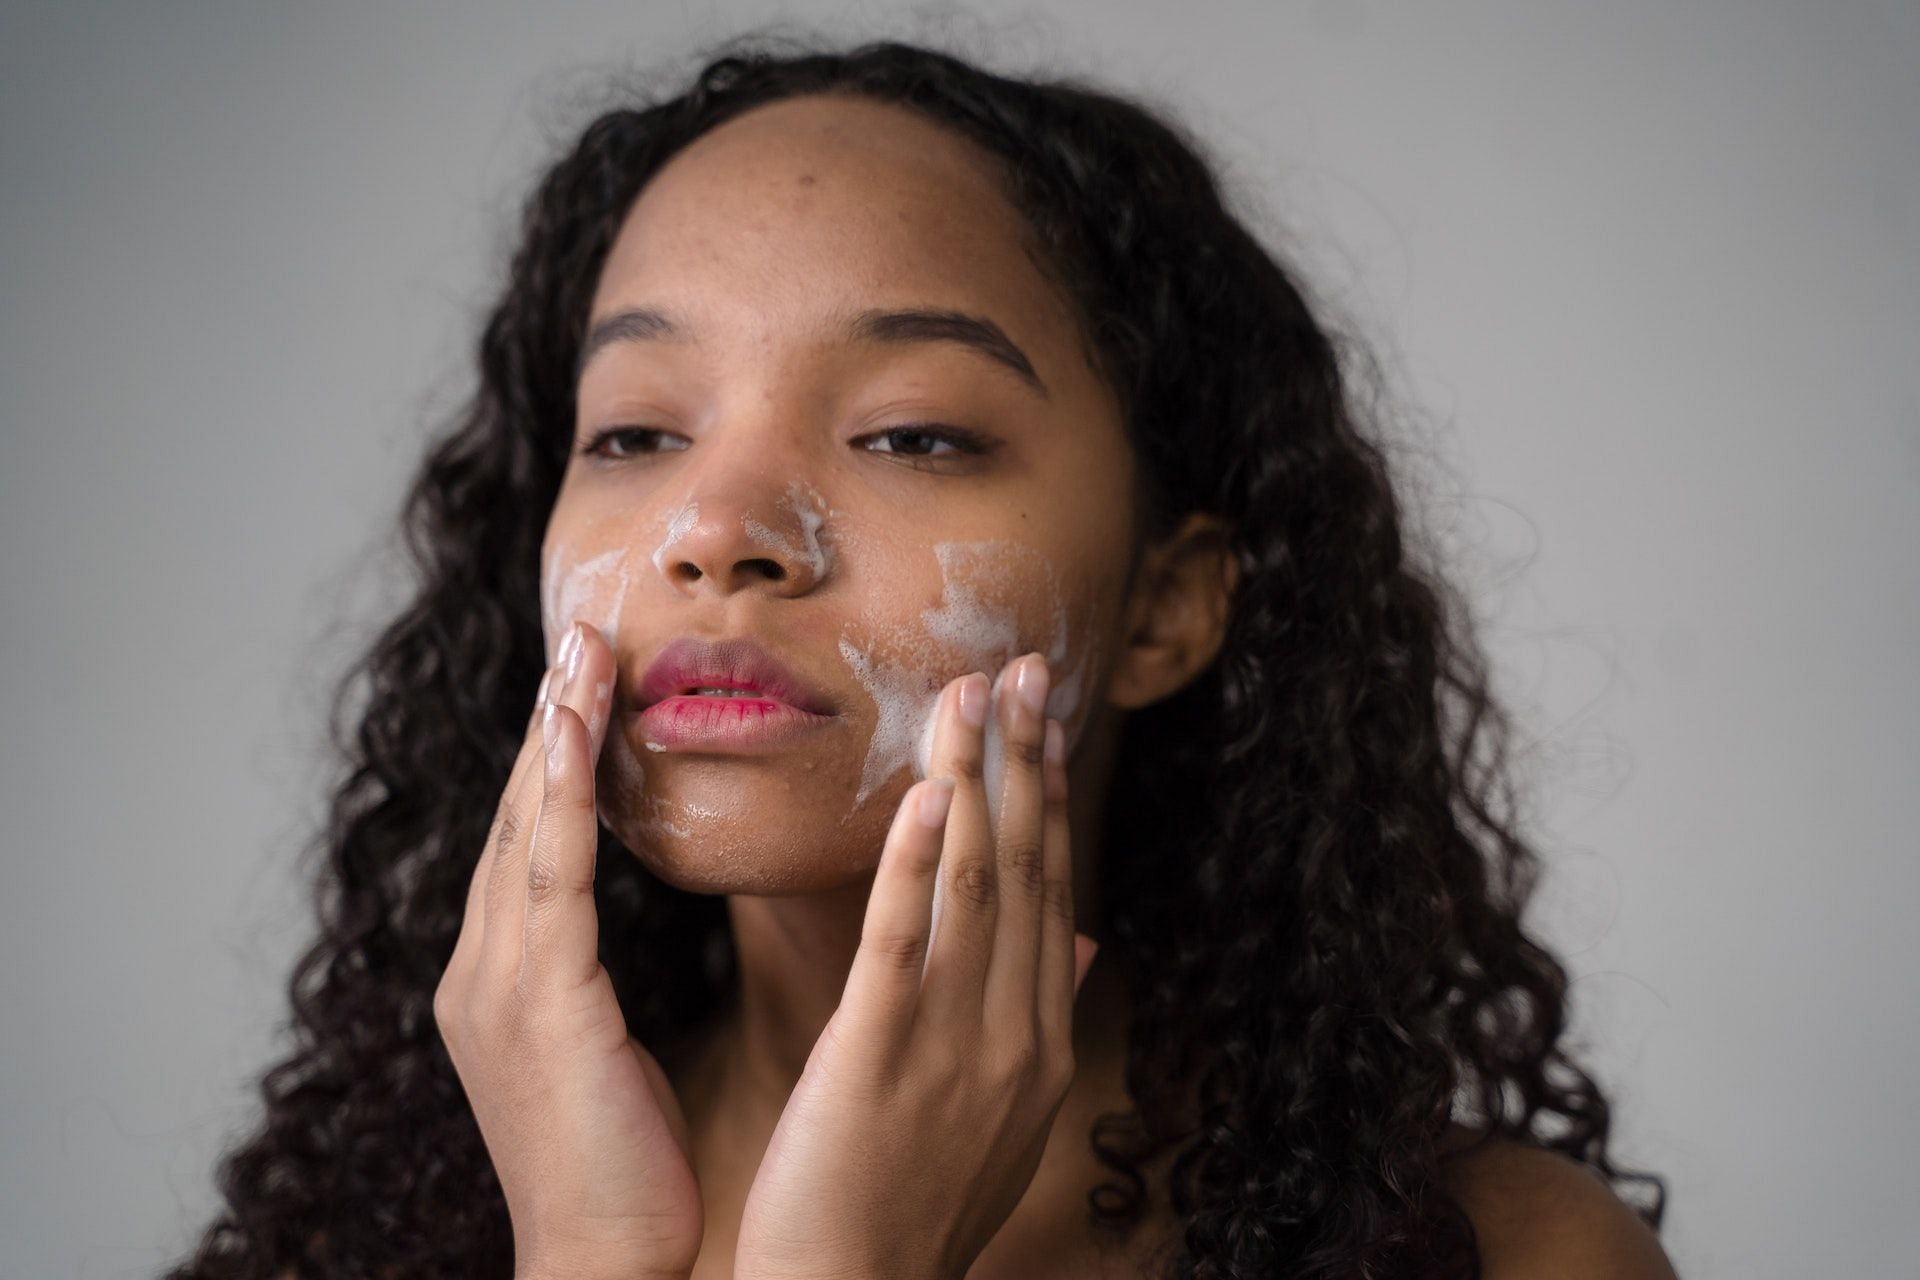 Face wash contains several toxic chemicals. (Photo via Pexels/Ron Lach)